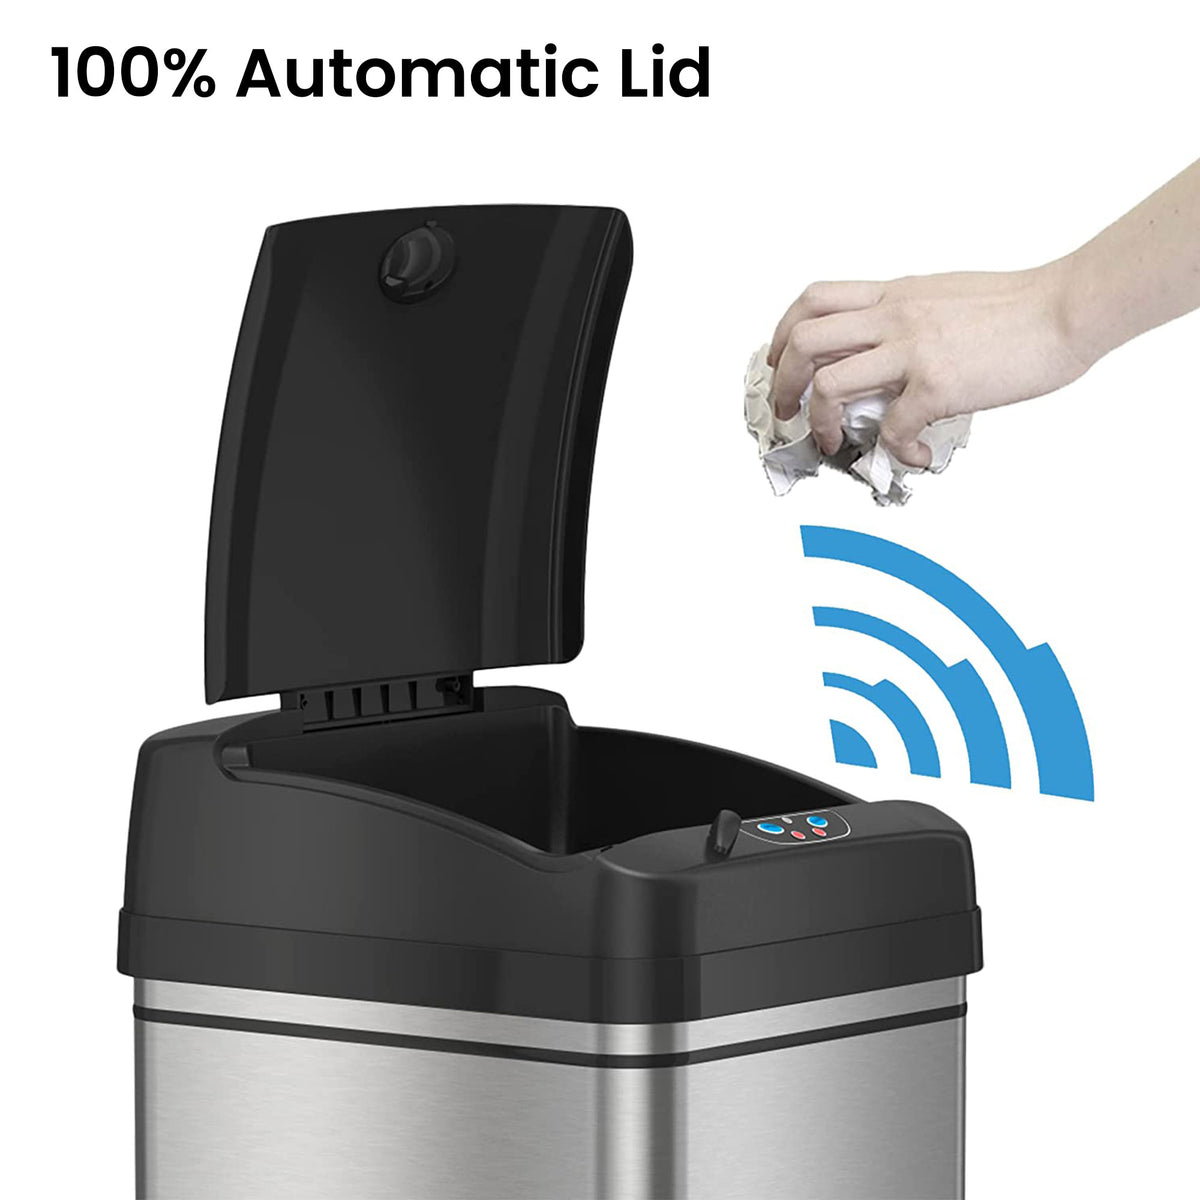 13 Gallon and 2.5 Gallon Kitchen and Bathroom Platinum Edition Sensor Trash  Cans Combo Pack